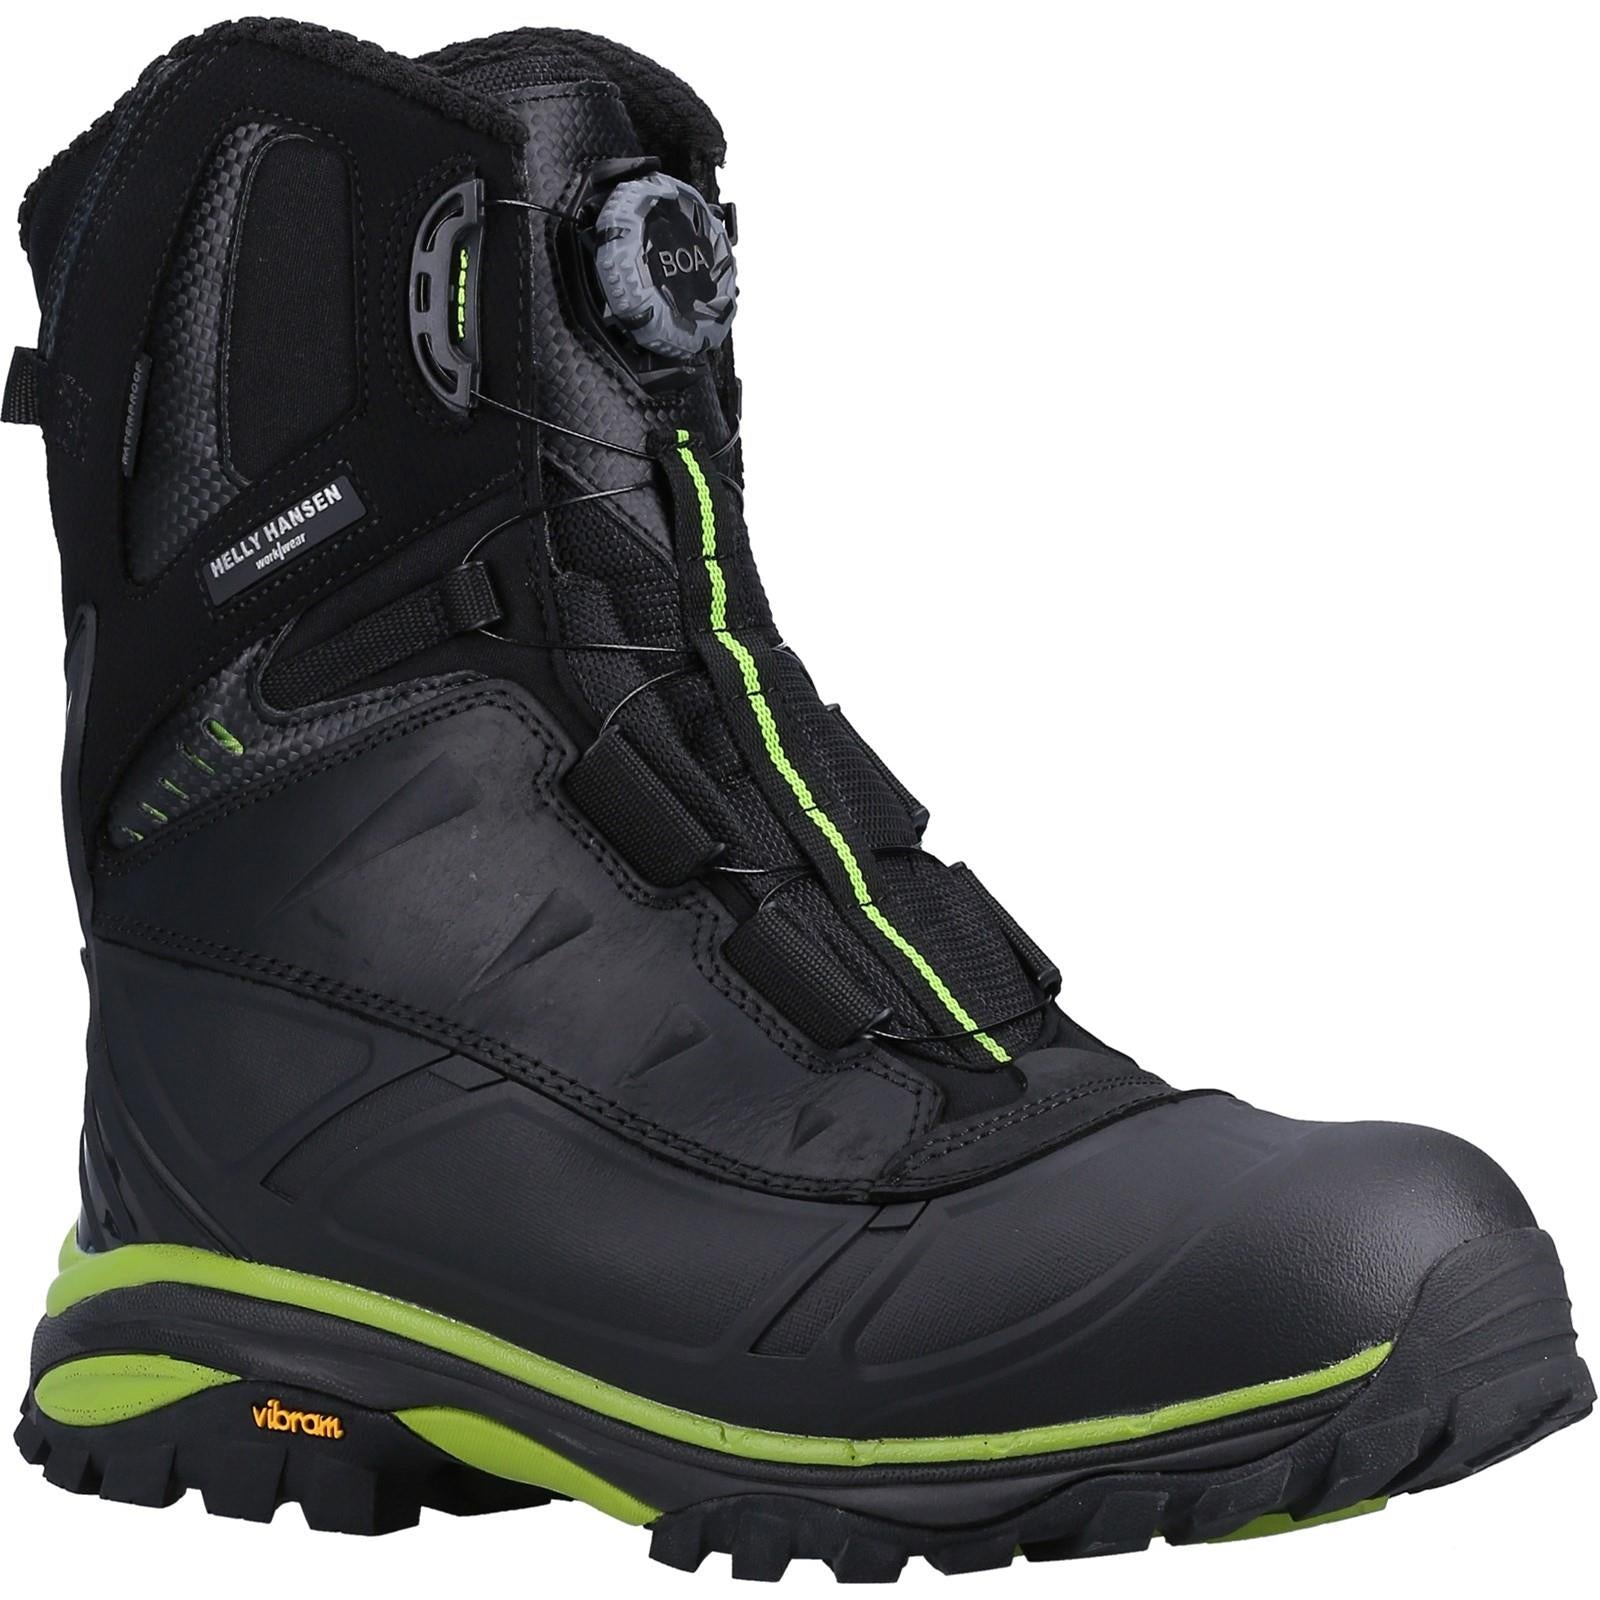 Helly Hansen Magni Boa Winter composite toe/midsole waterproof insulated safety boot #78317